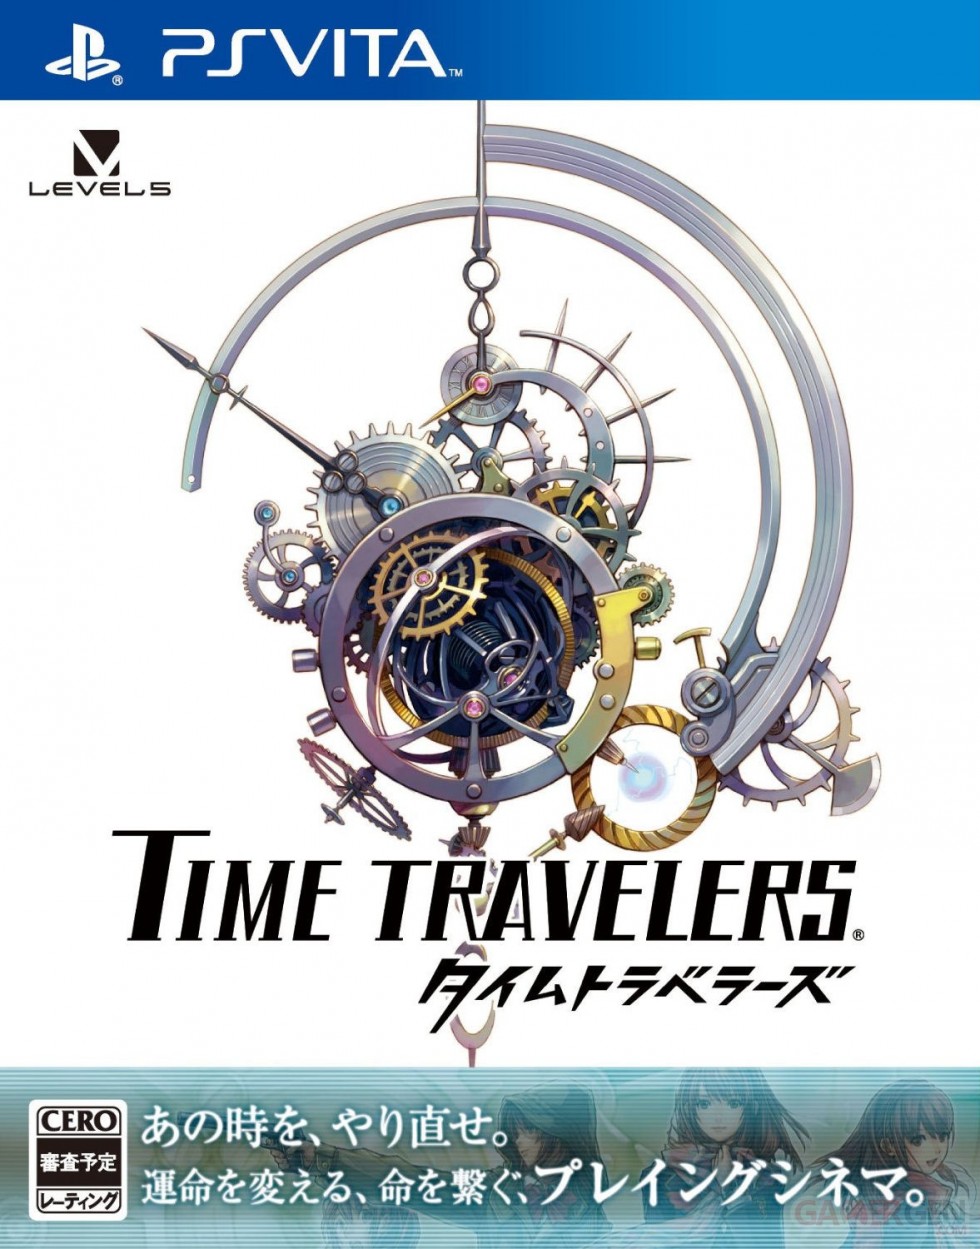 Time Travelers jaquette covers 11.06